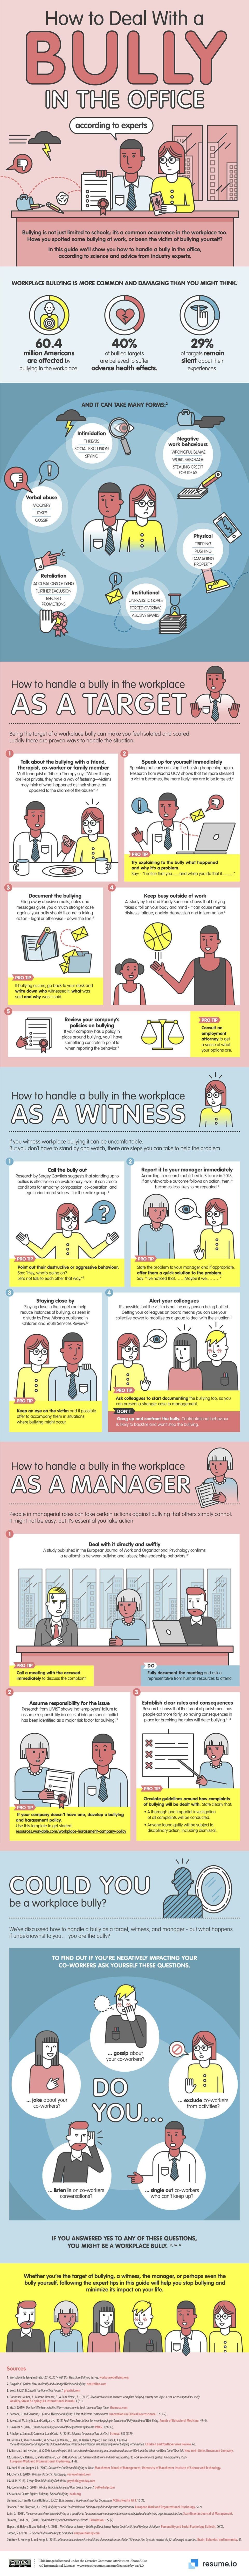 How To Deal With A Bully In The Office (According To Science)